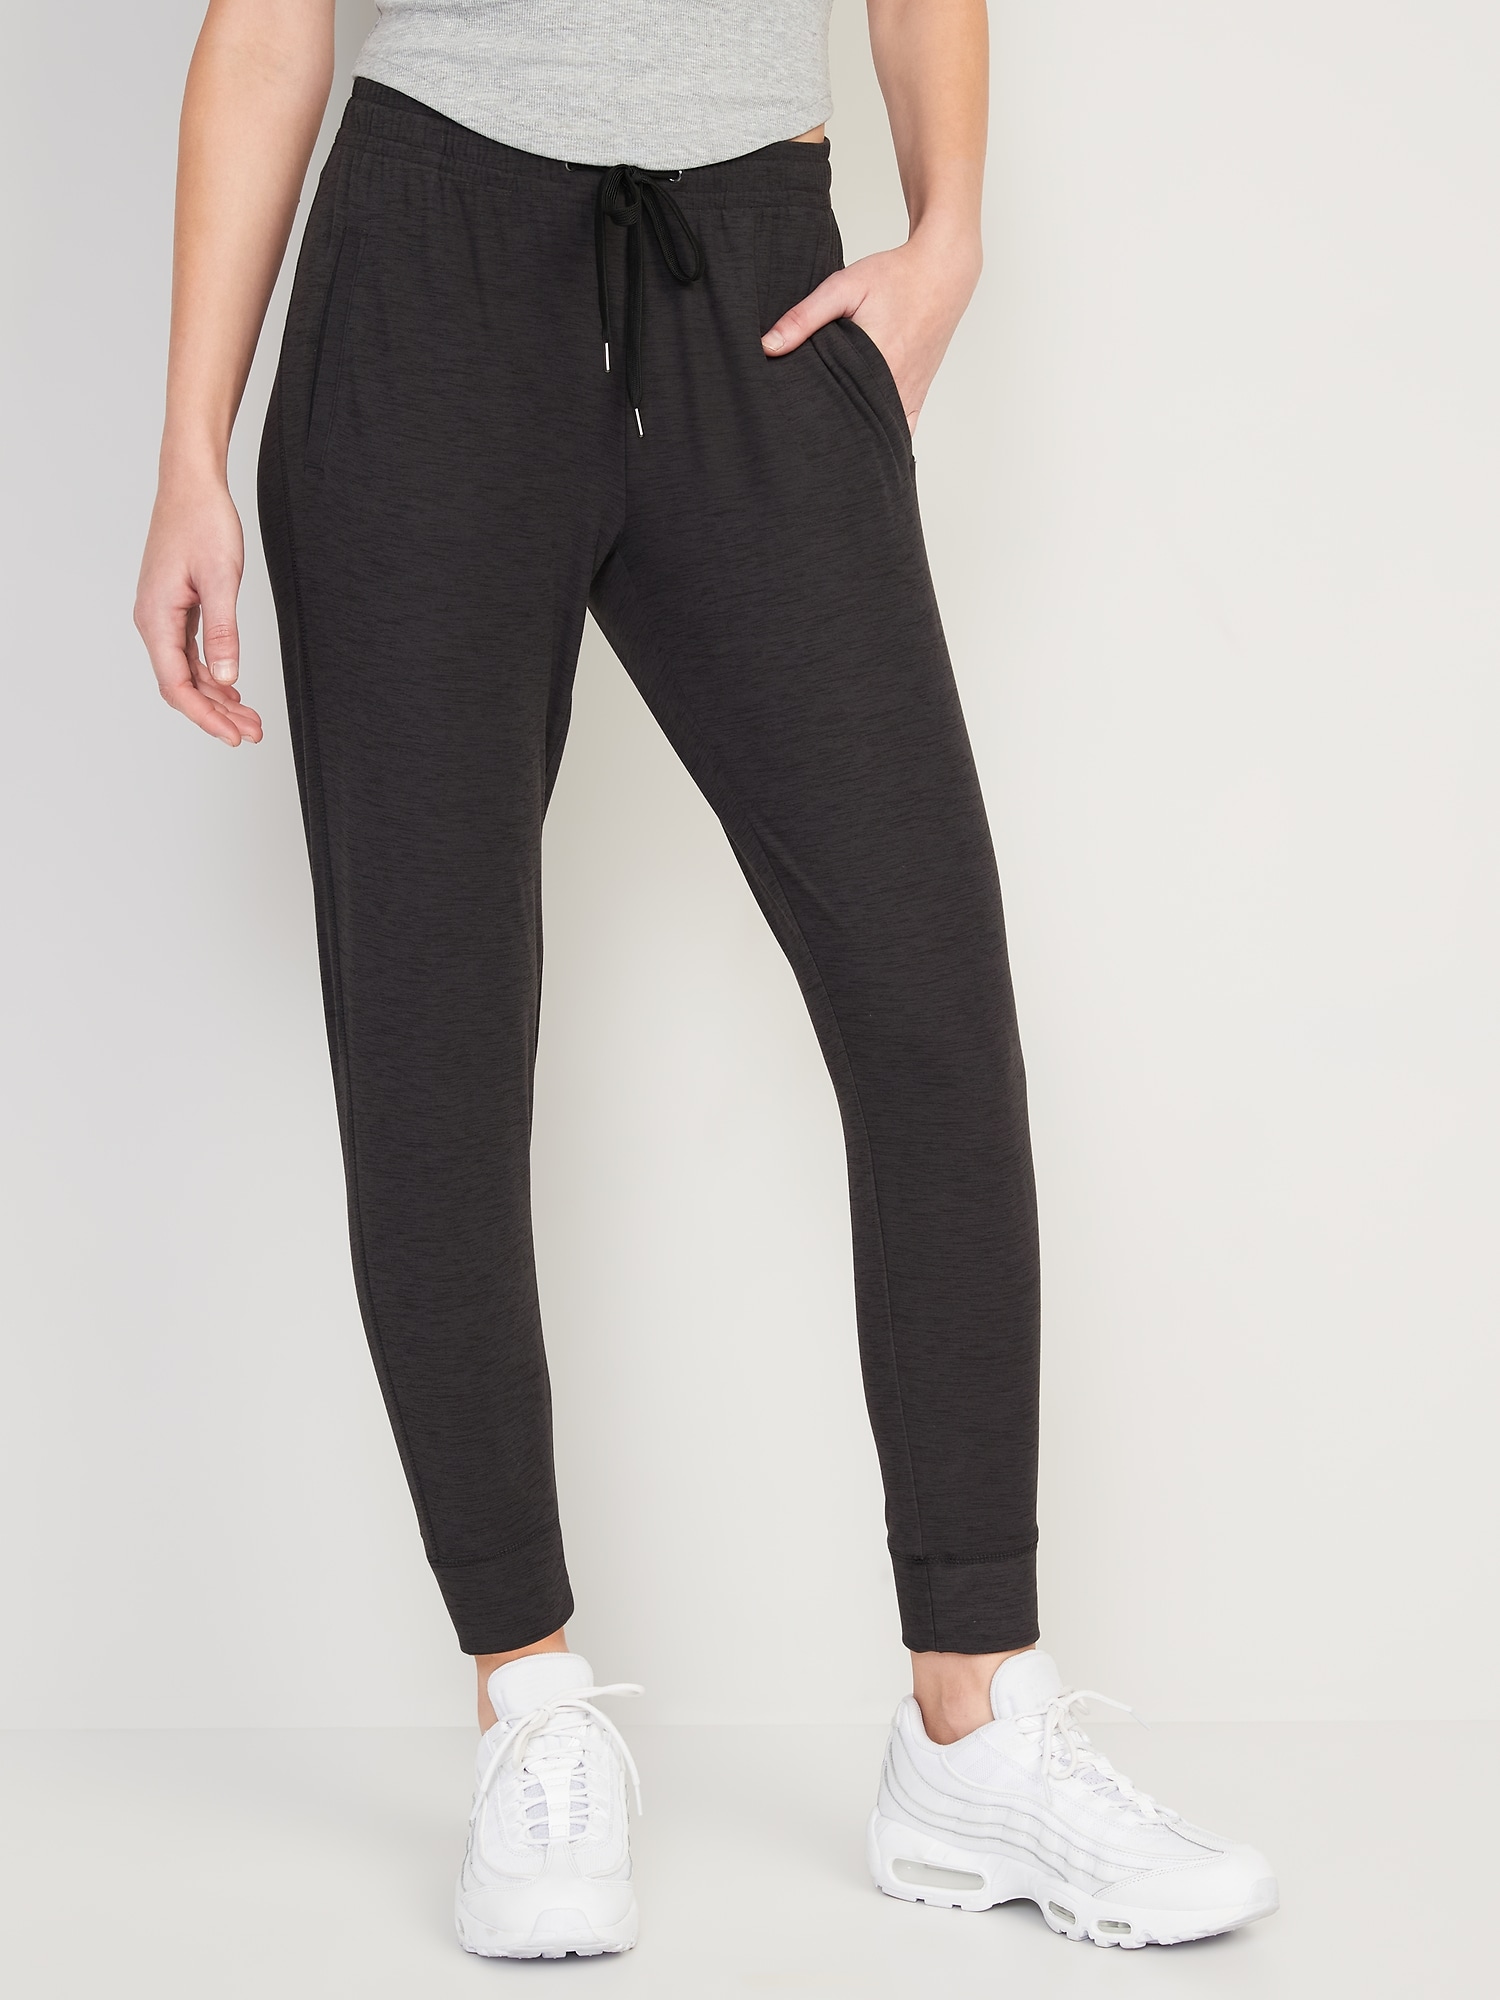 Sweatpants With Elastic Cuffs For Women